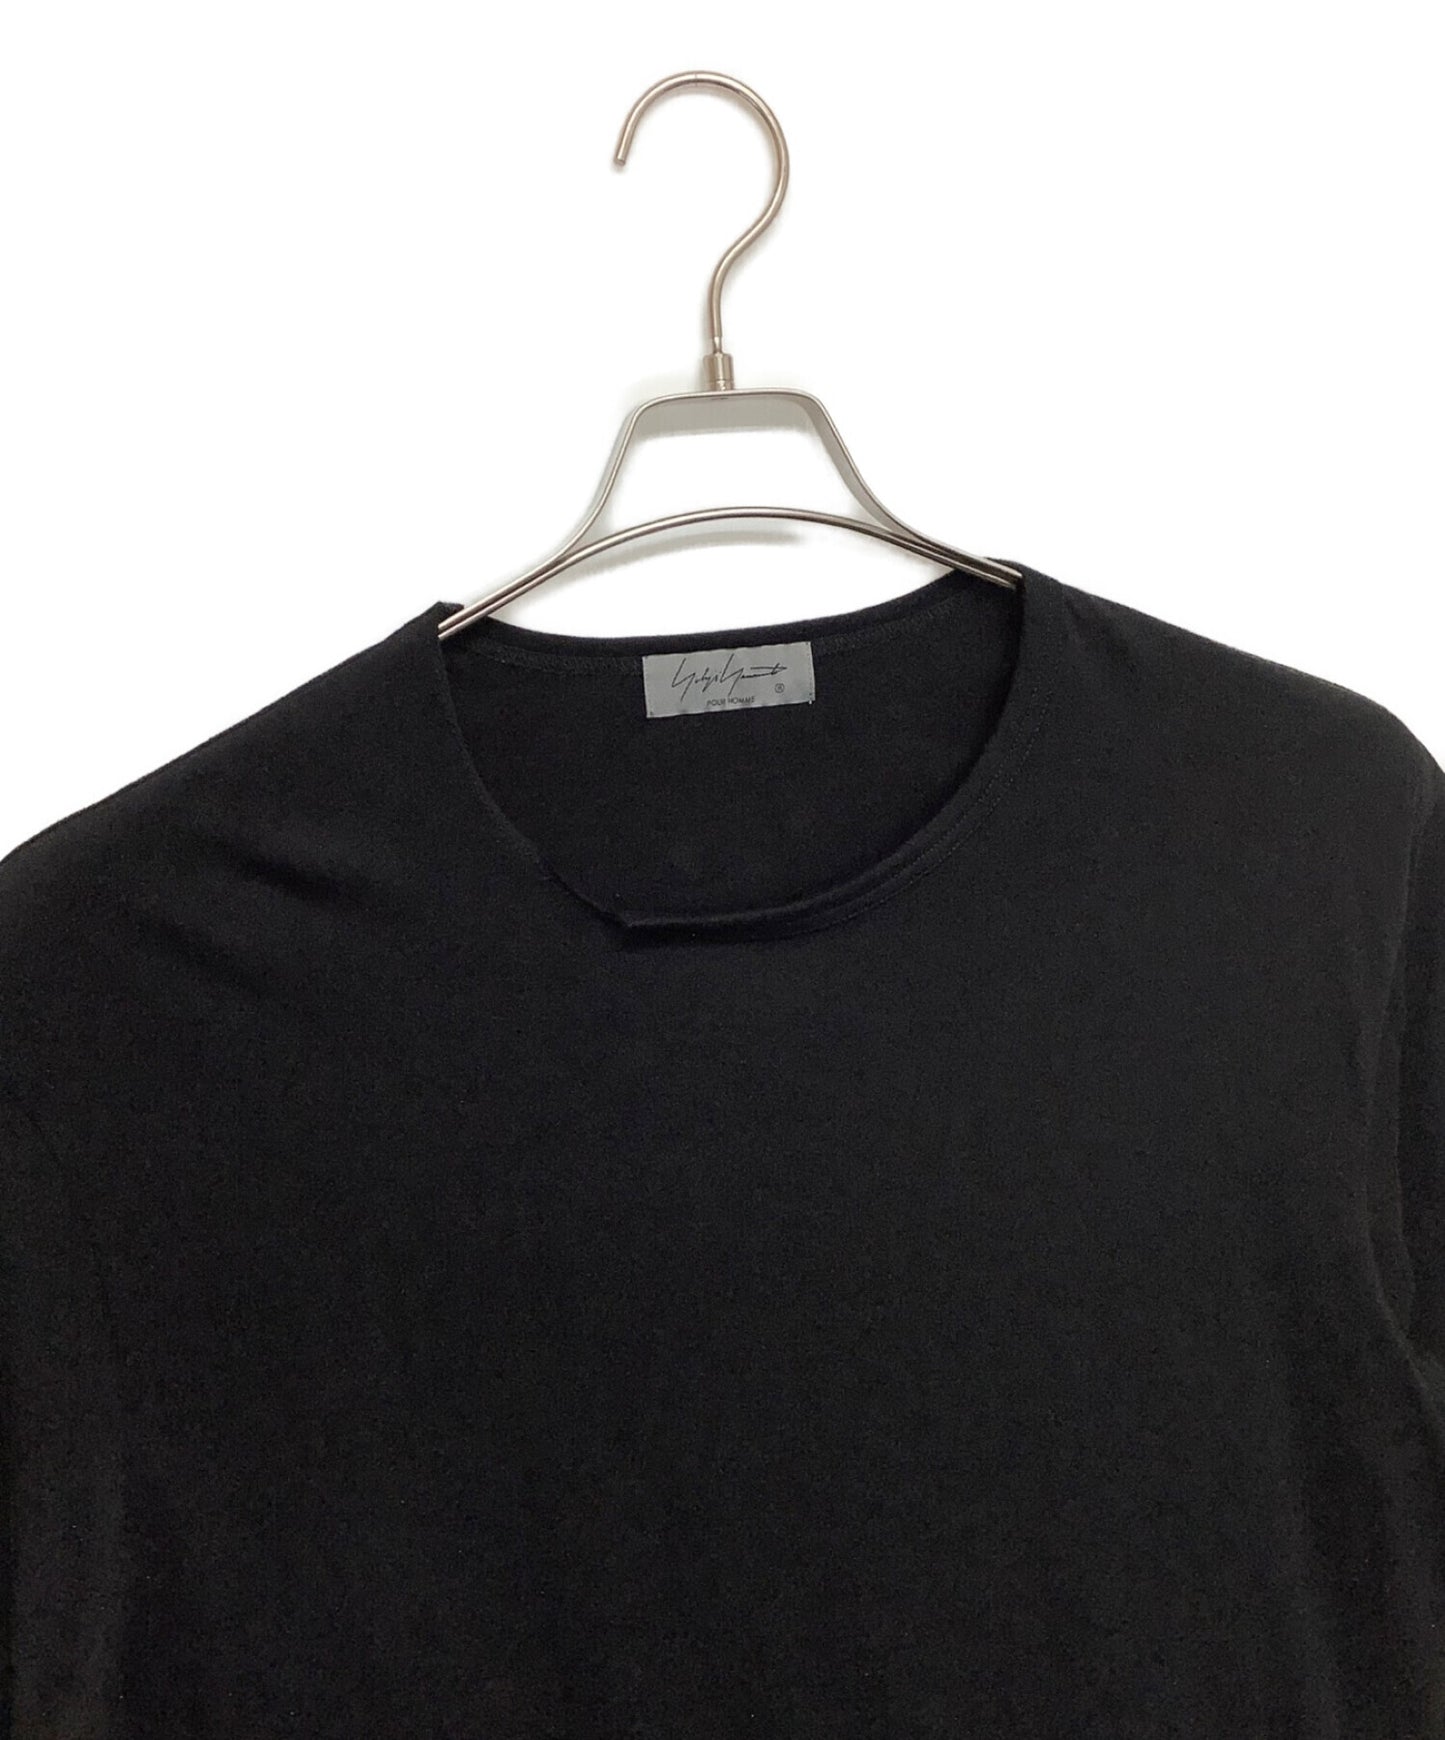 [Pre-owned] Yohji Yamamoto pour homme long-sleeved cut-and-sew HZ-T60-997